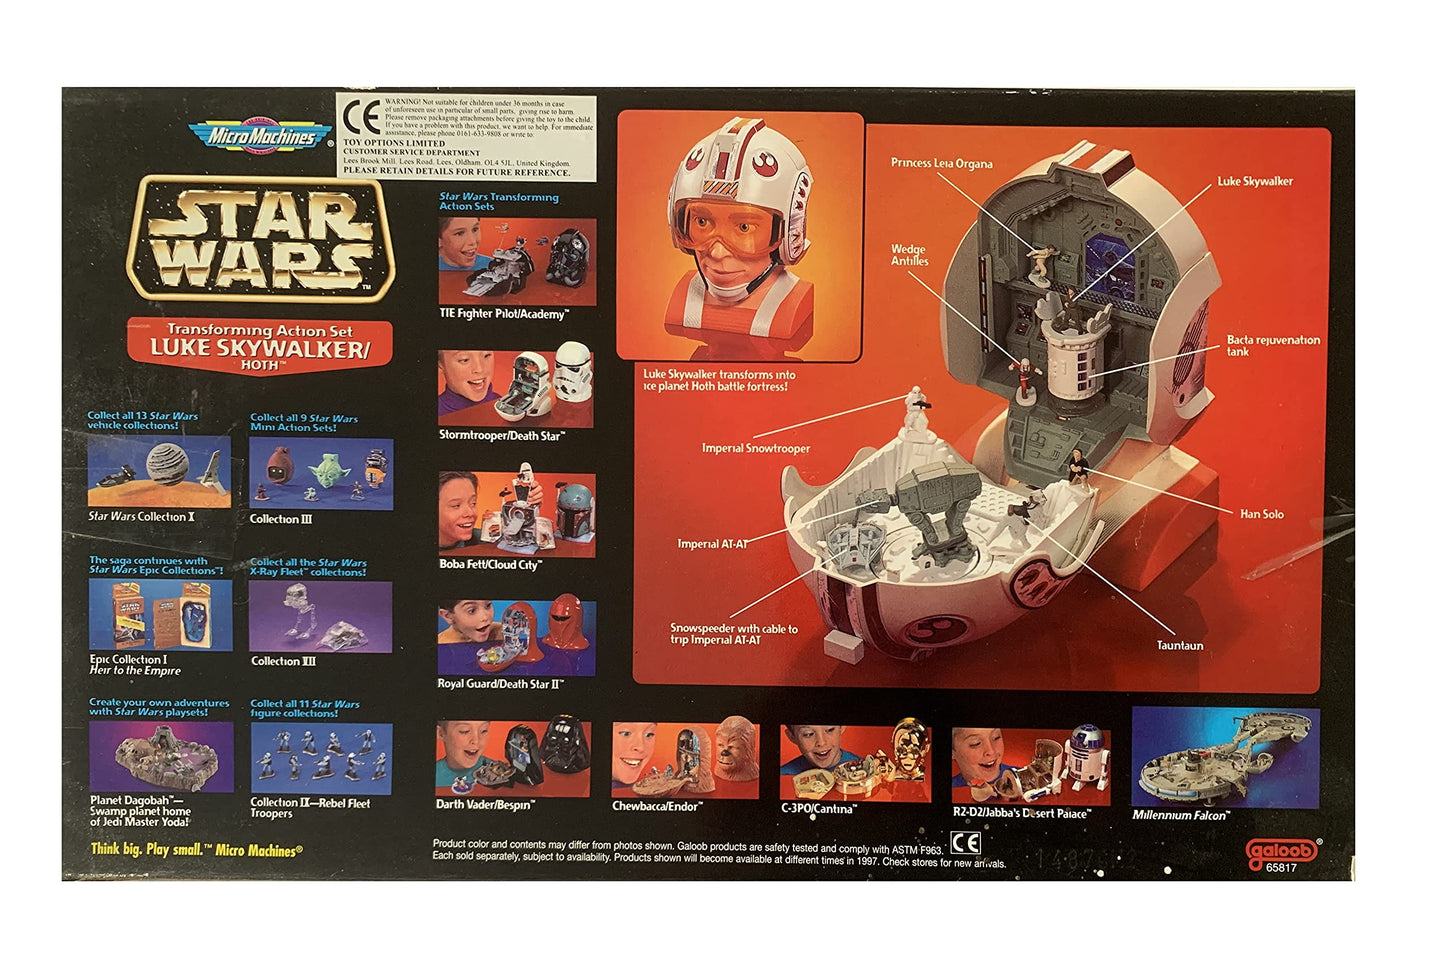 Vintage Ultra Rare Galoob 1997 Star Wars Micro Machines Luke Skywalker / Ice Planet Hoth Battle Fortress Action Play Set - Brand New Factory Sealed Shop Stock Room Find